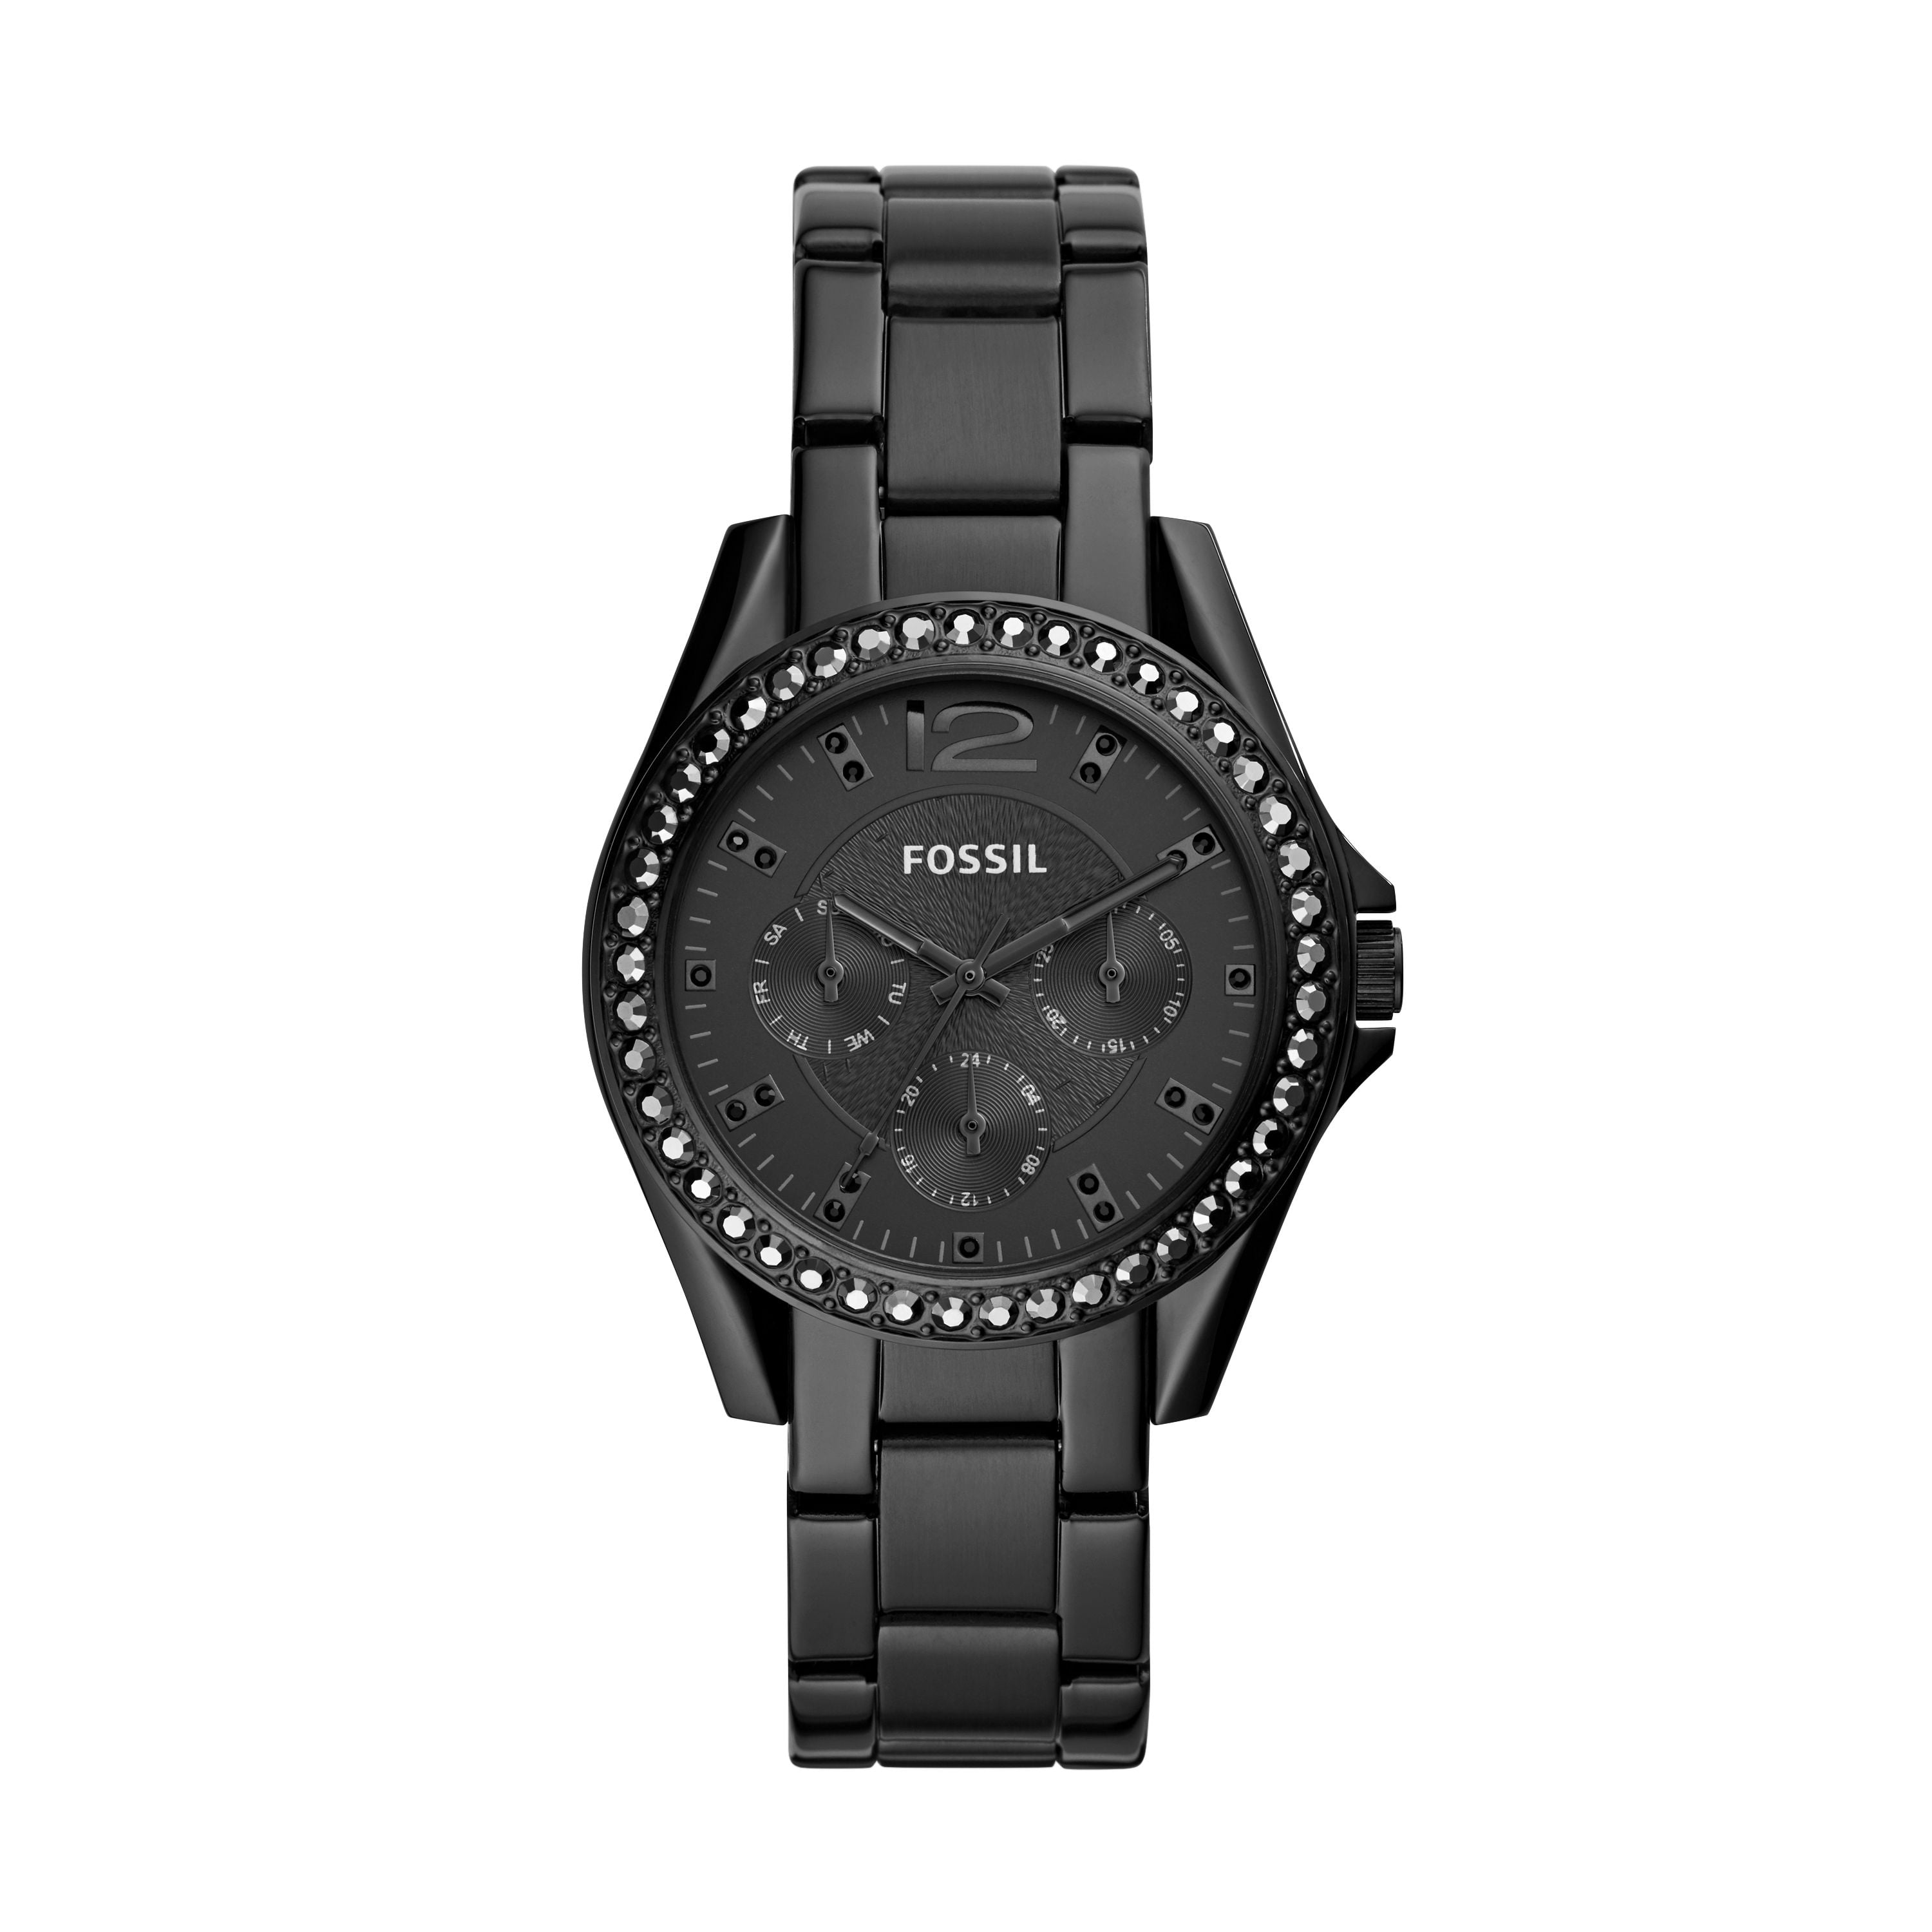 Fossil - Fossil Women's Riley Multifunction Black Stainless Steel Watch